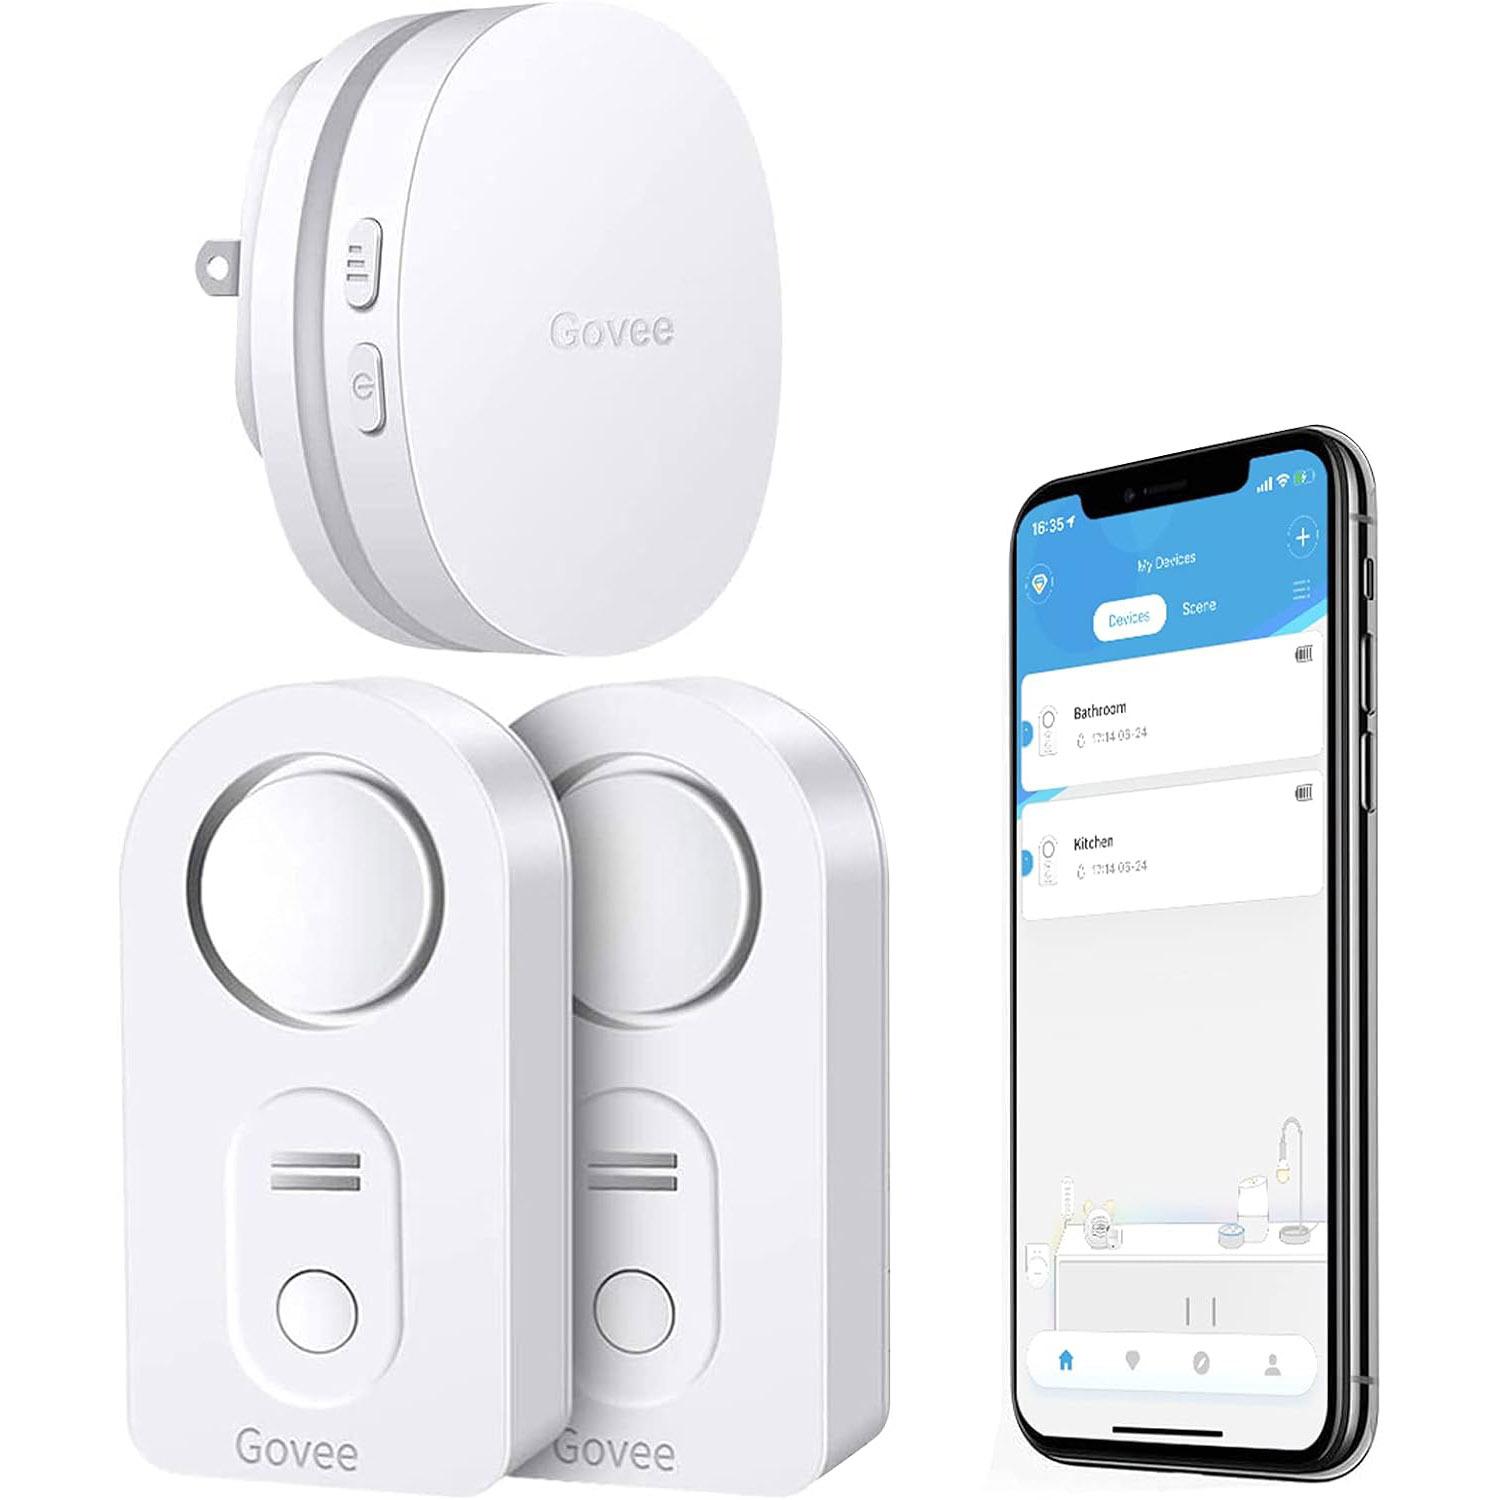 Govee Wi-Fi Water Sensors + Gateway 2 Pack for $19.72